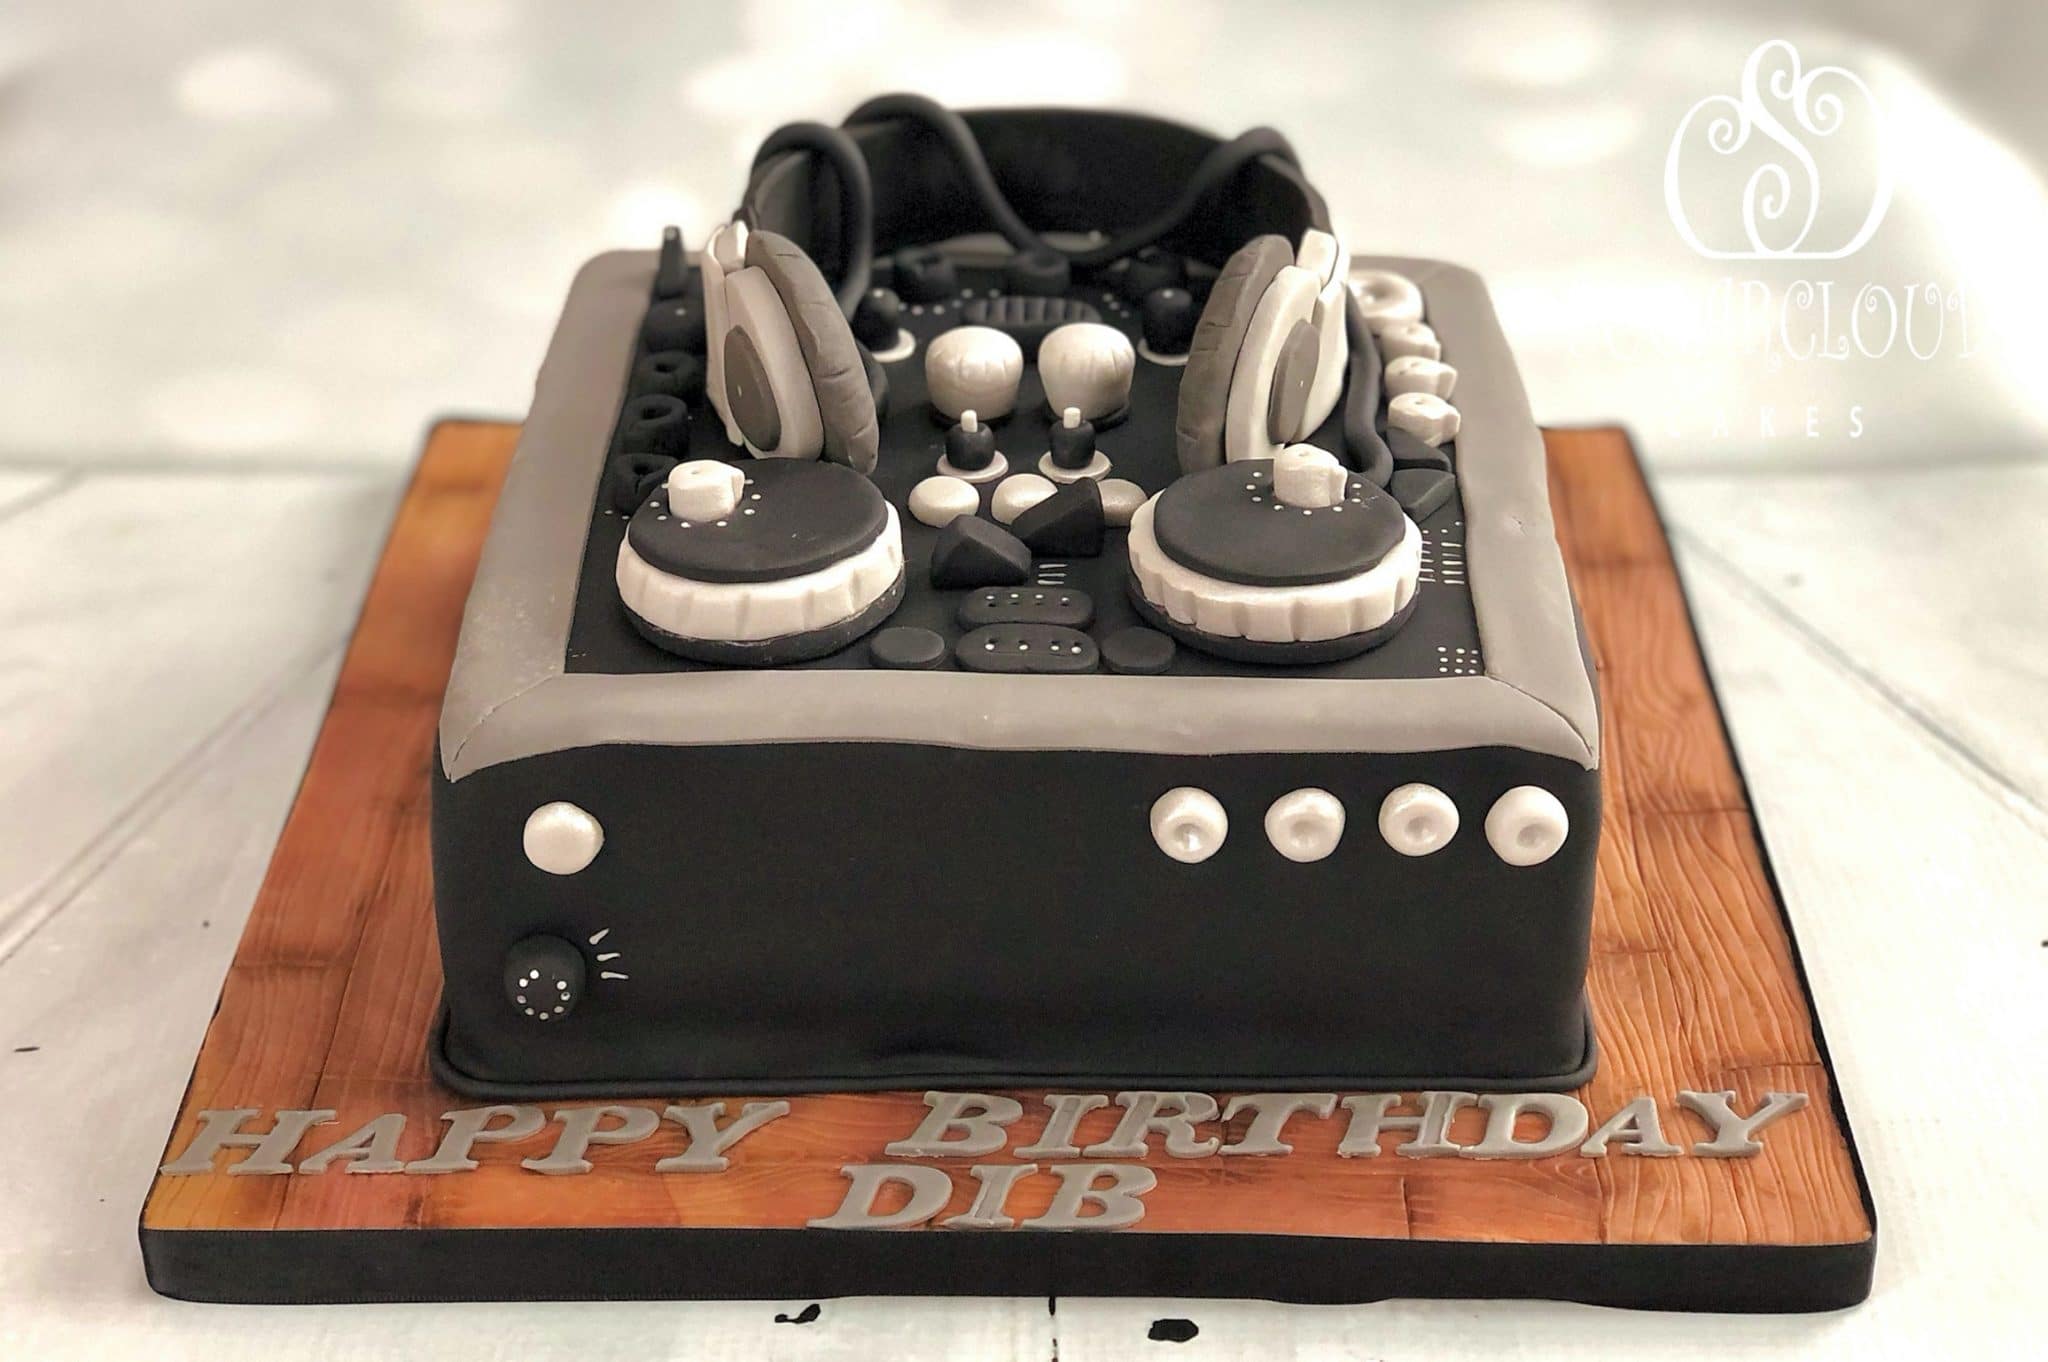 Lighted DJ Turntable Cake : 5 Steps (with Pictures) - Instructables